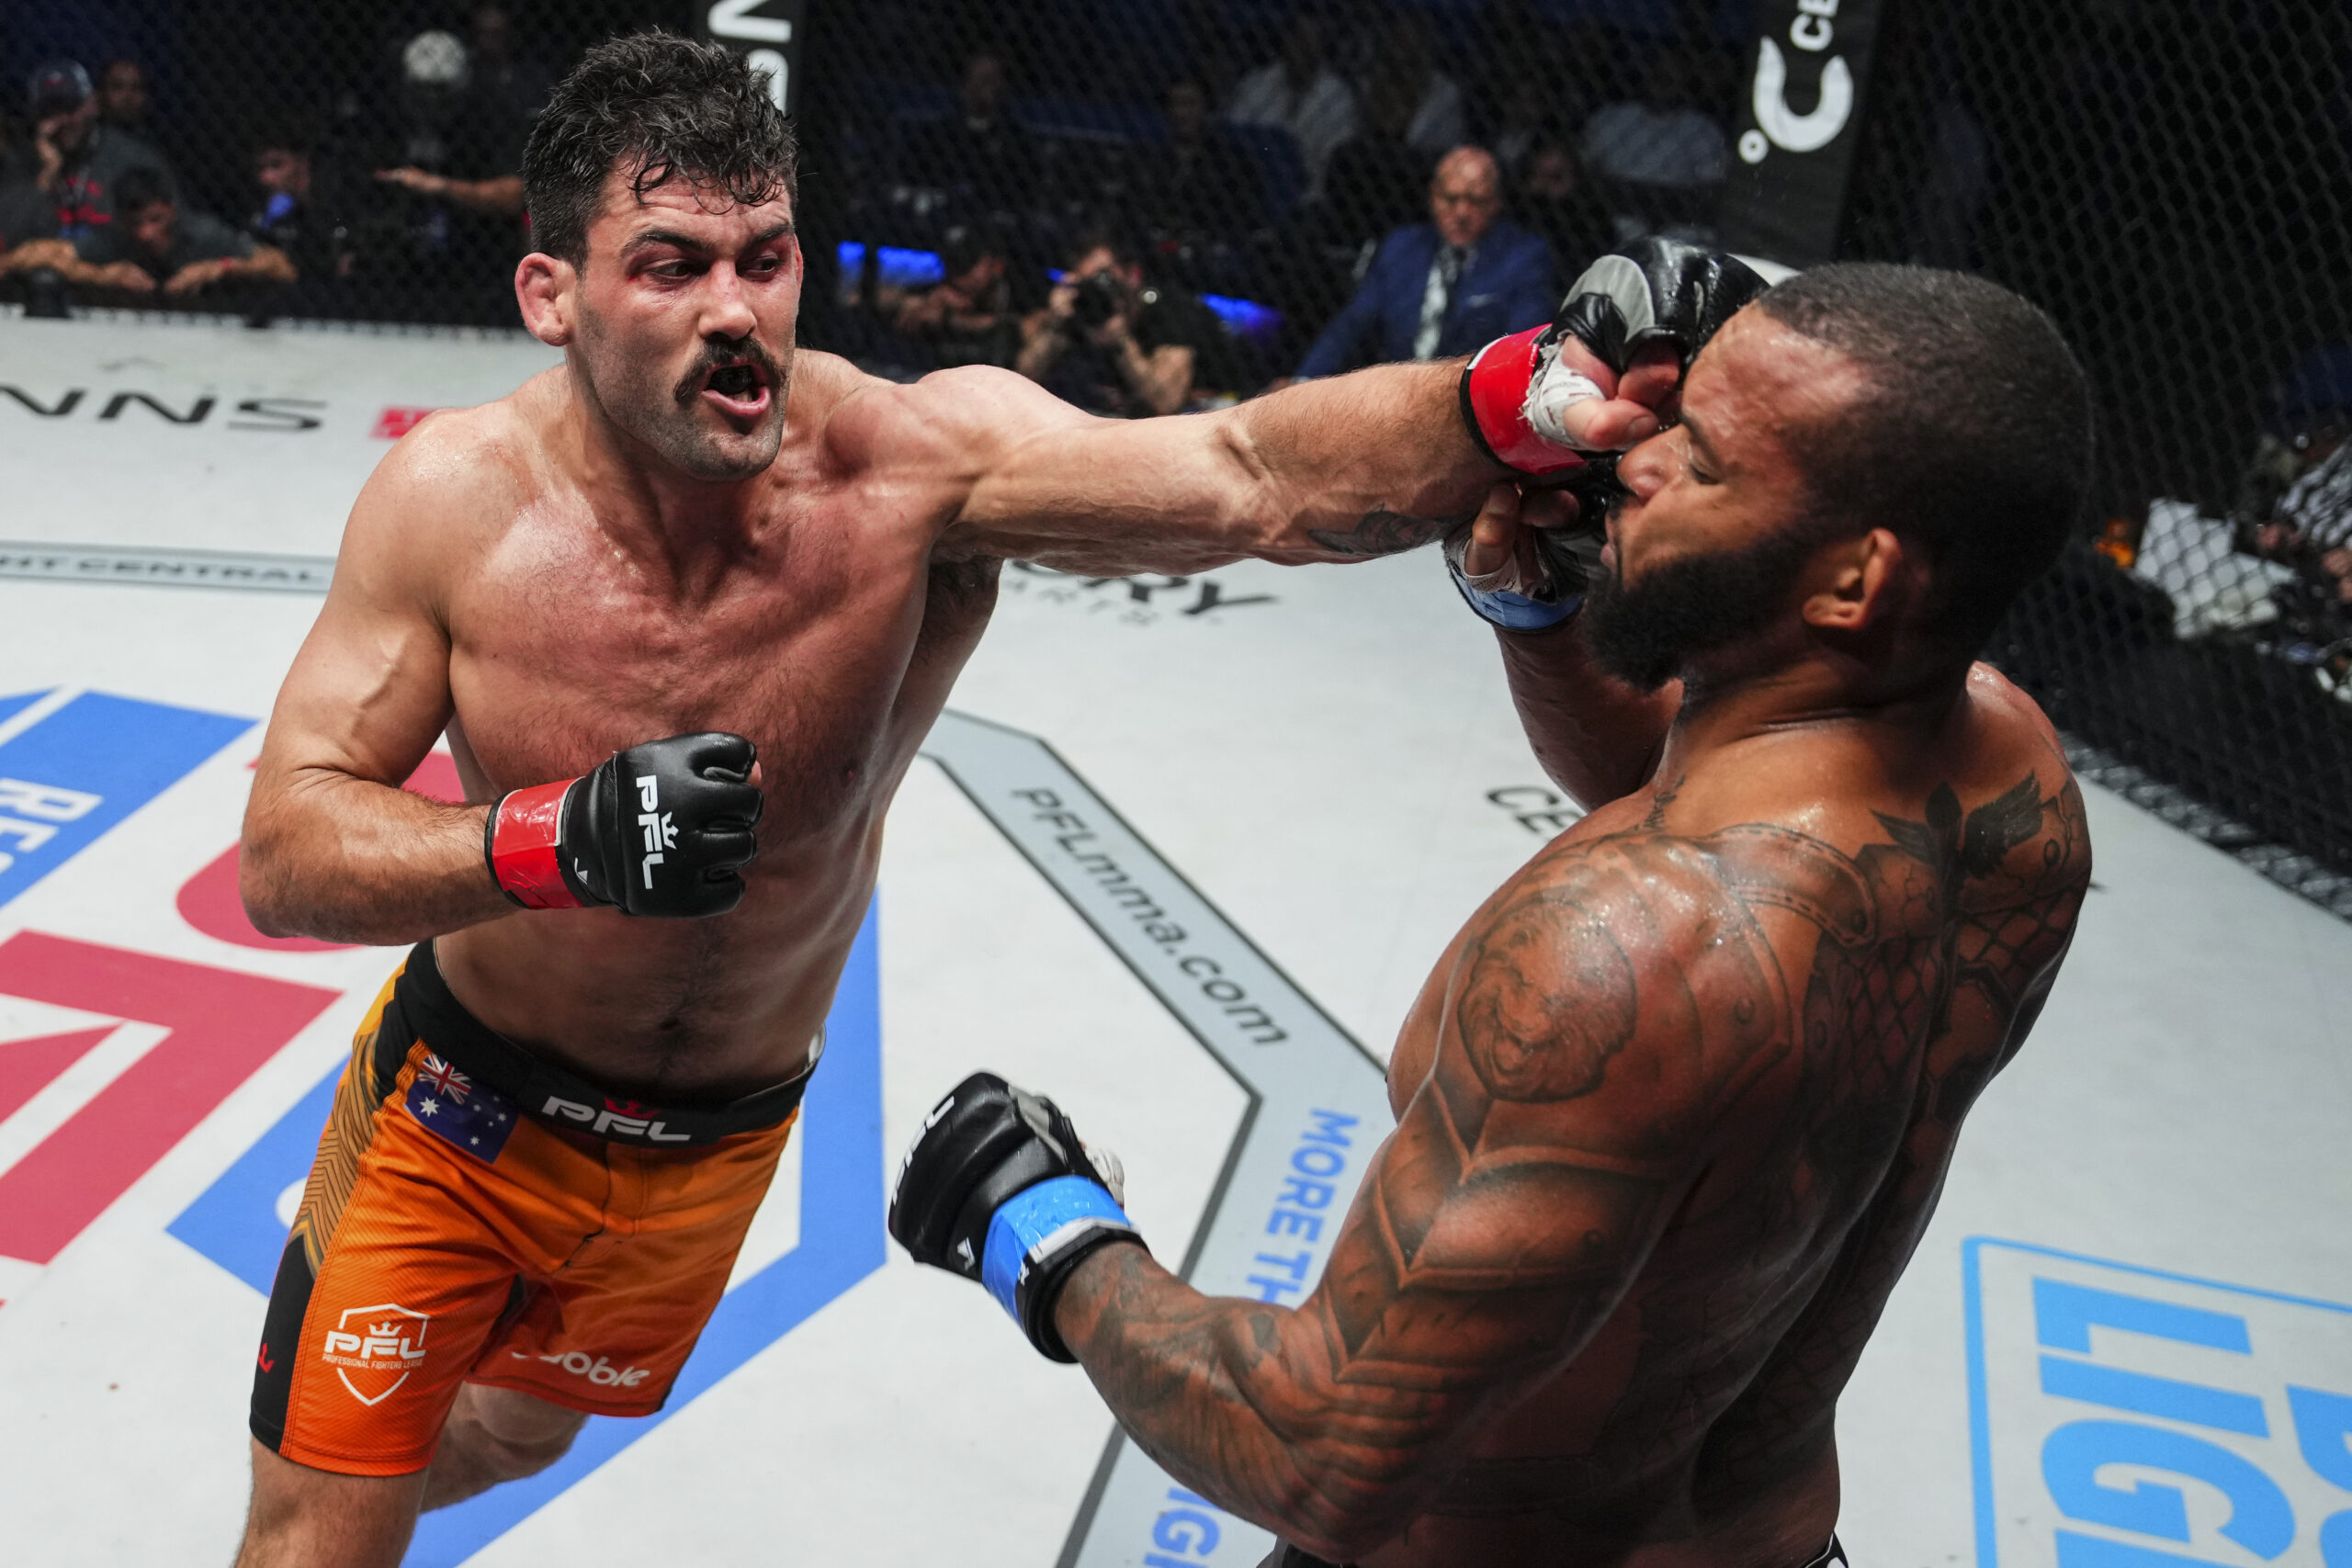 USA TODAY Sports/MMA Junkie rankings, April 4: Rob Wilkinson enters at light heavyweight